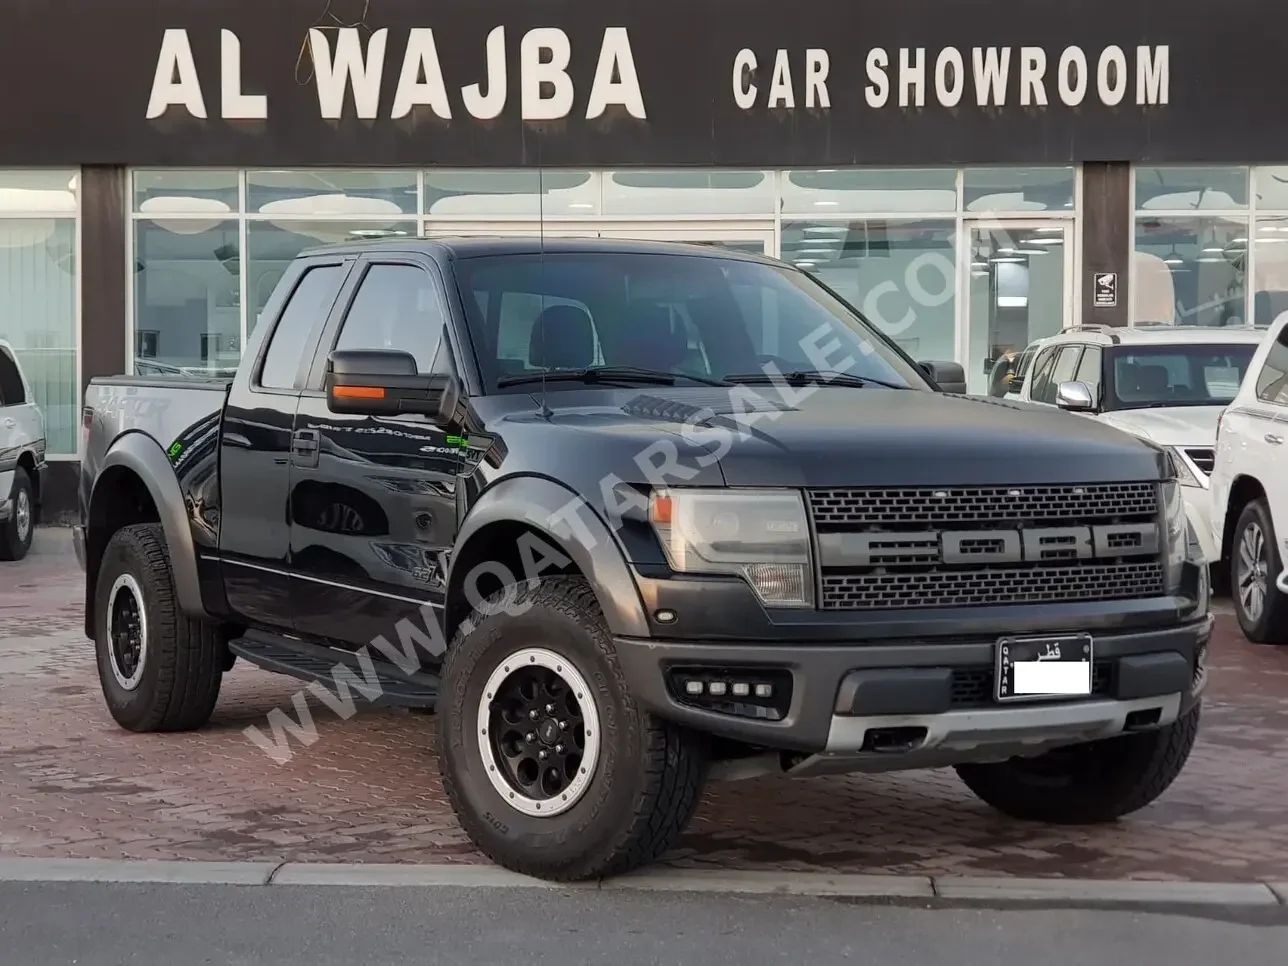 Ford  Raptor  2014  Automatic  105,000 Km  8 Cylinder  Four Wheel Drive (4WD)  Pick Up  Black